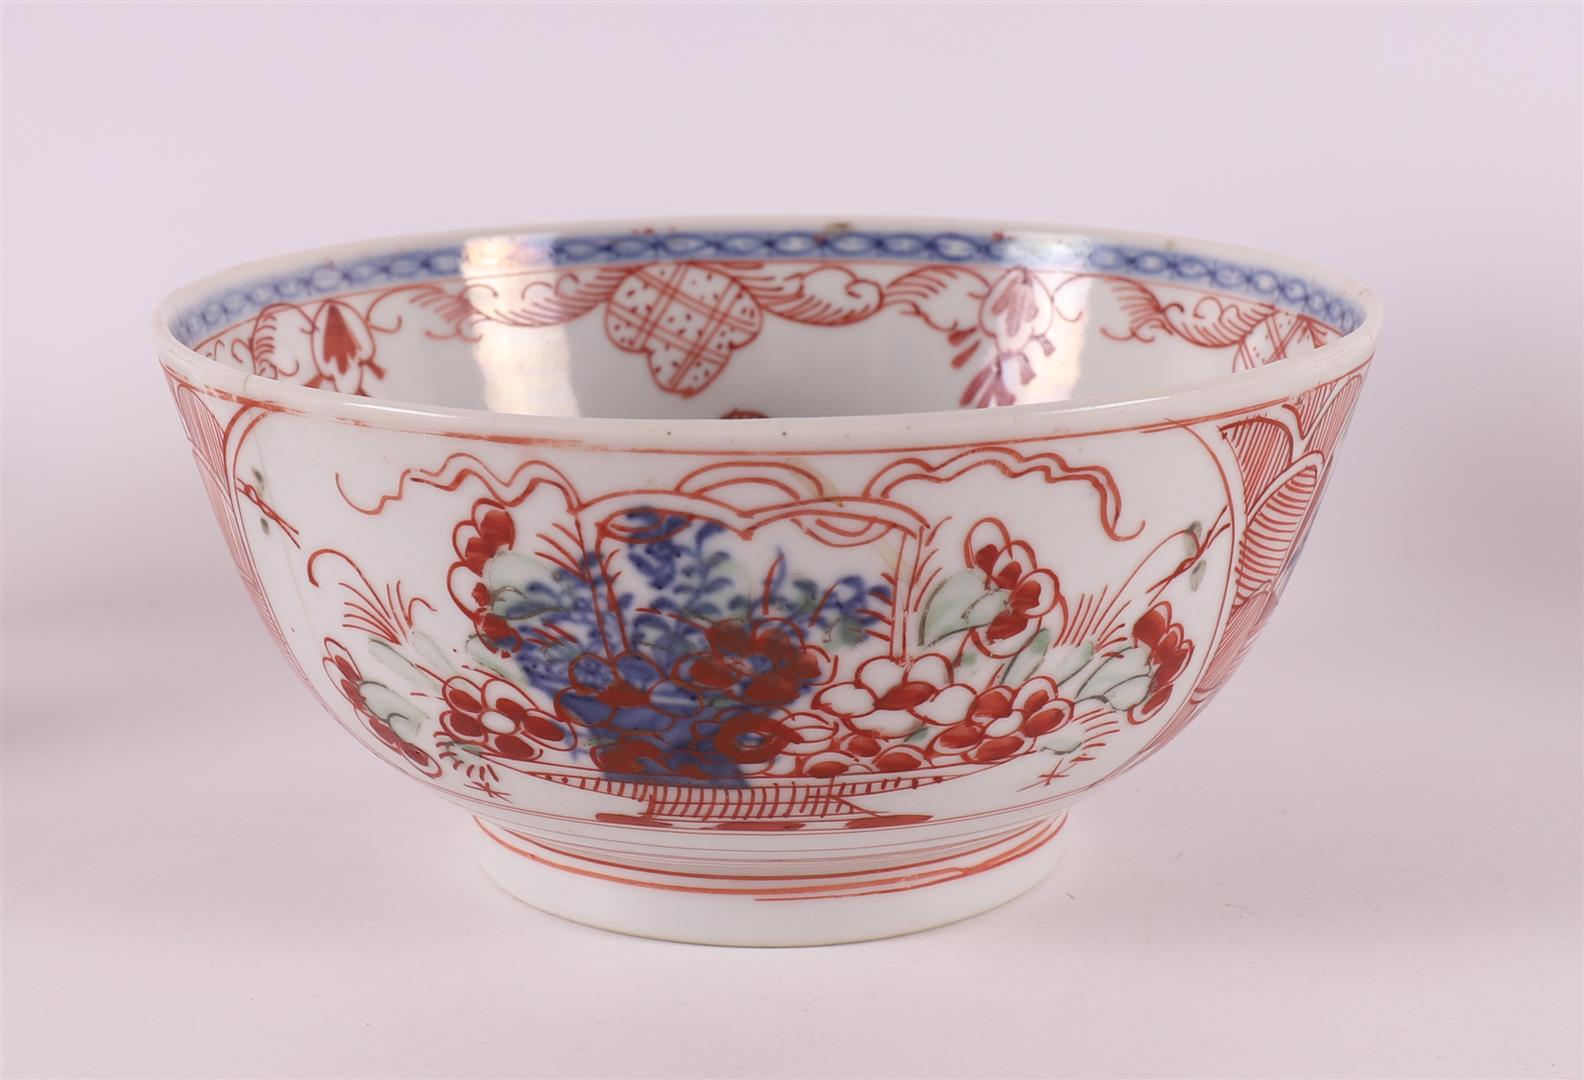 An Amsterdam colorful porcelain bowl, China, Qianglong, 18th century. Polychrome decoration of - Image 4 of 20